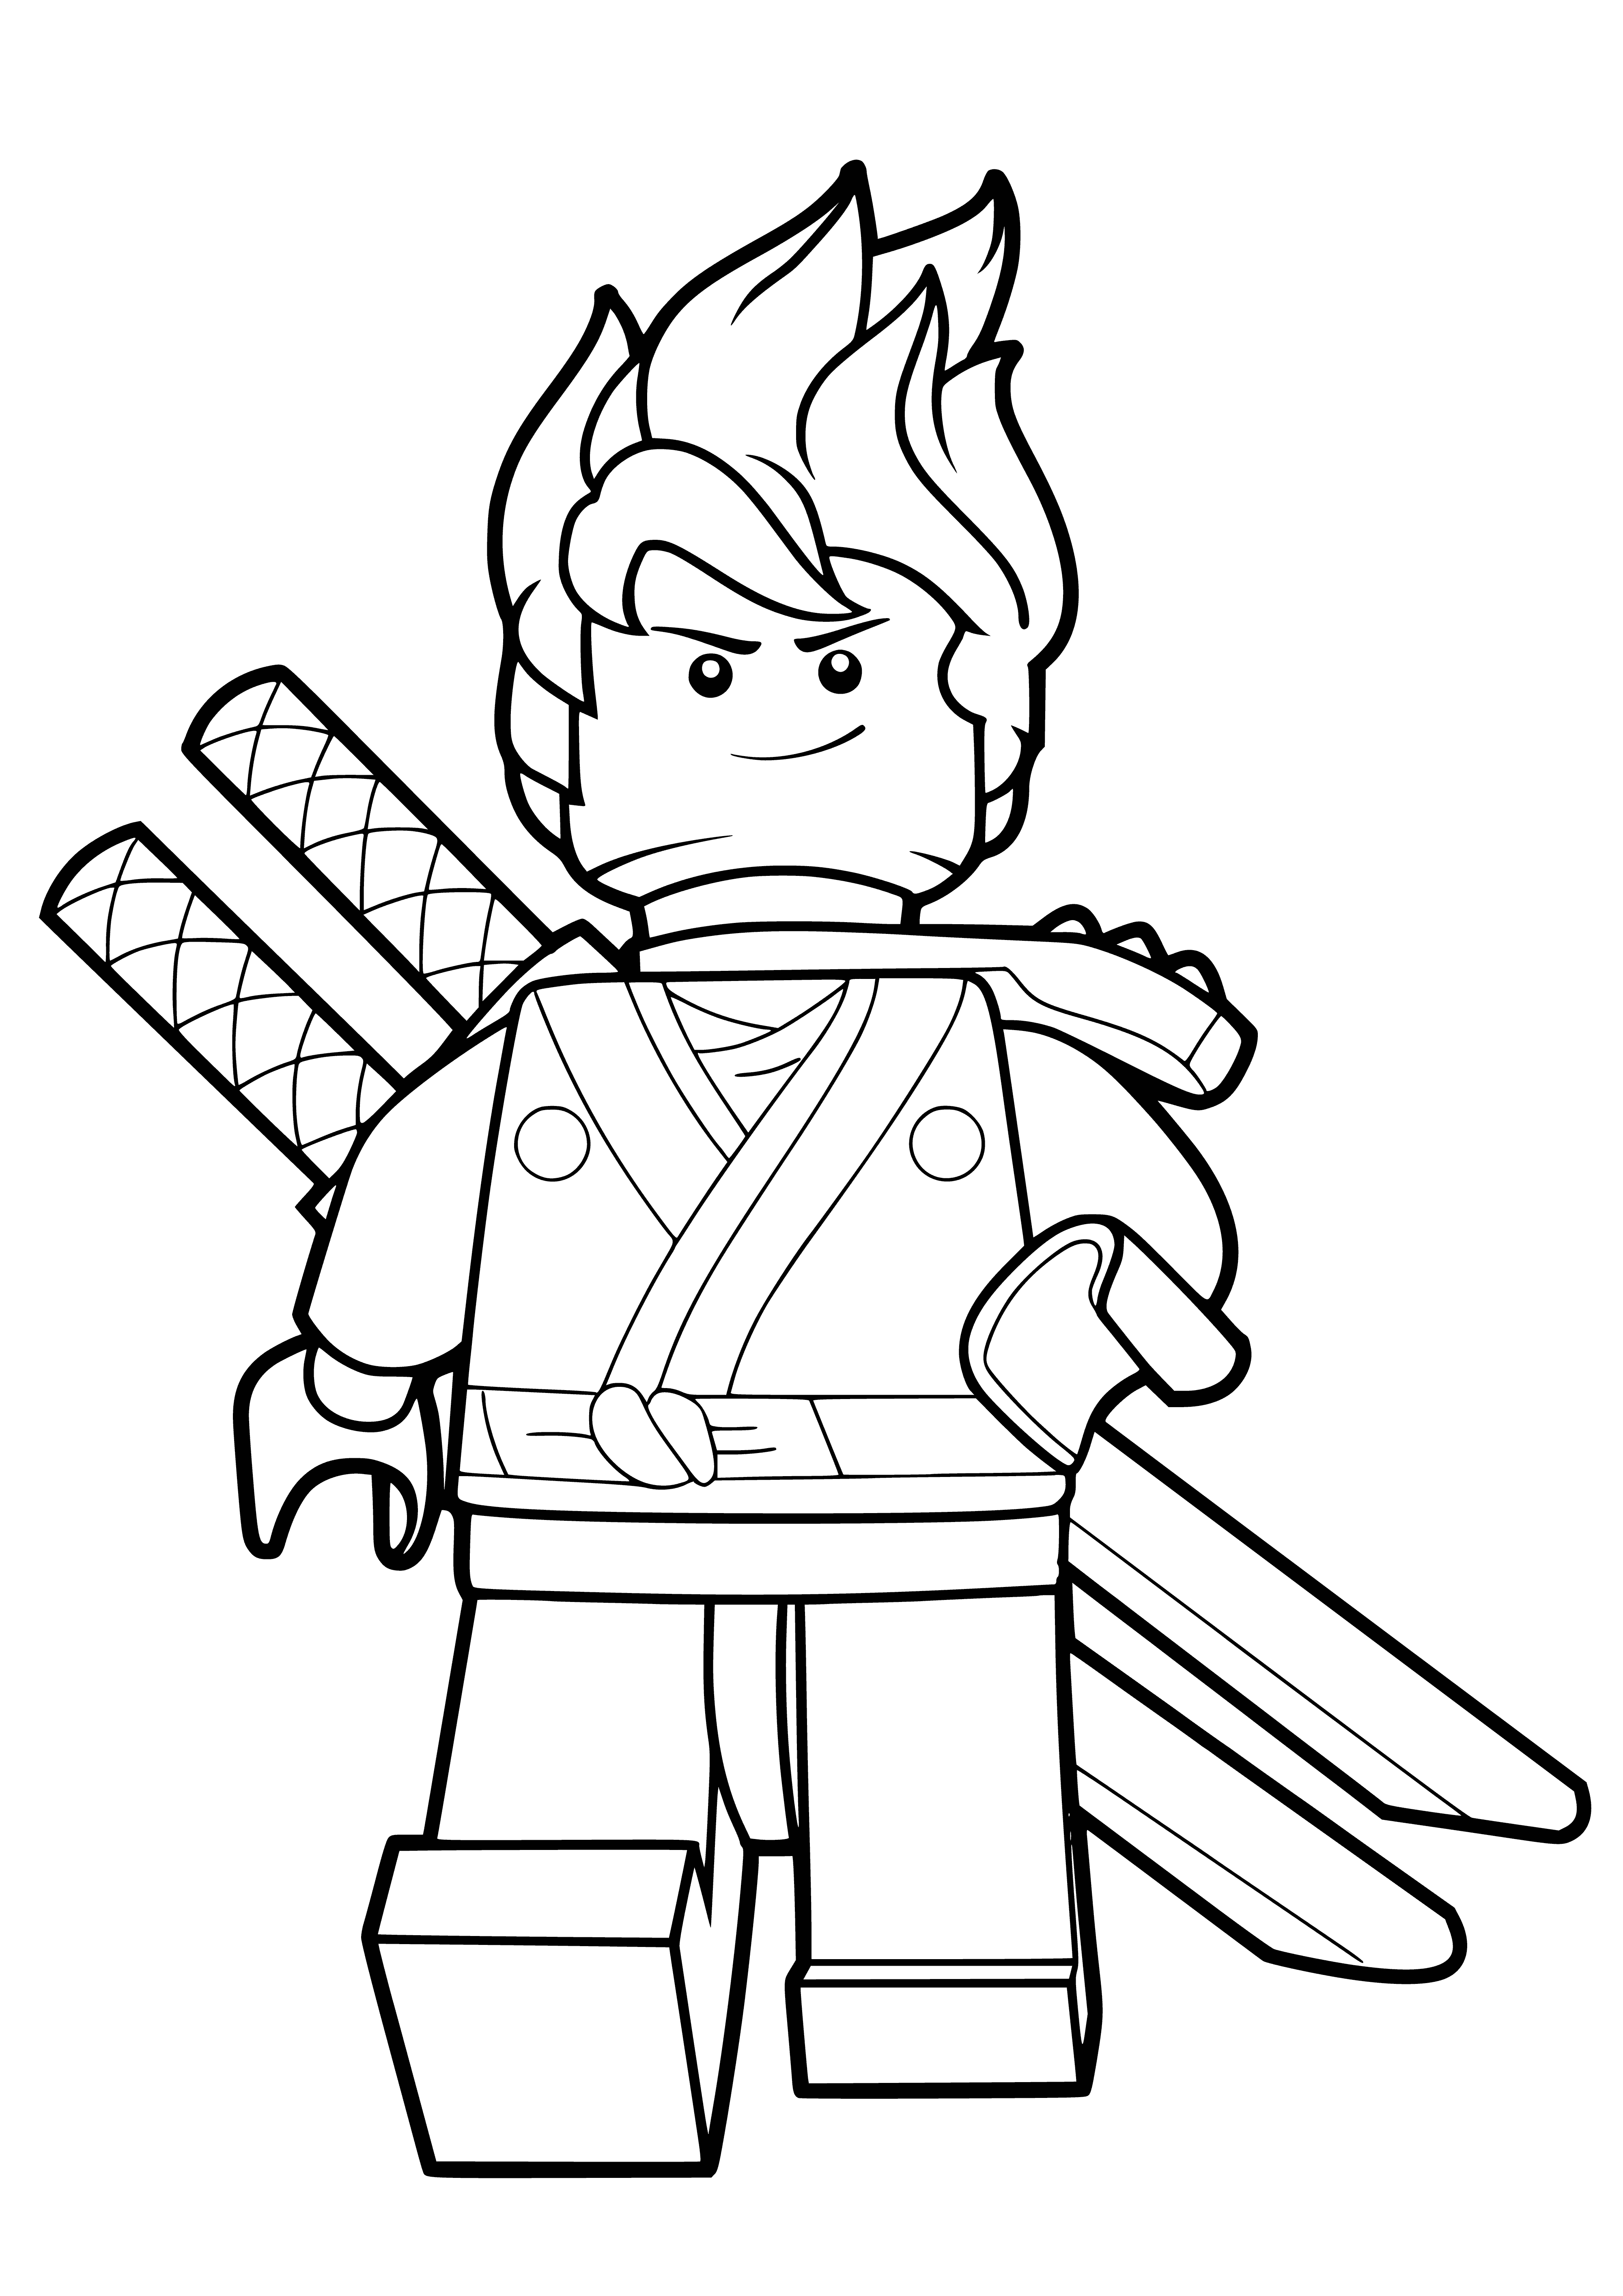 coloring page: Nine LEGO Ninjago characters in different colored ninja suits stand on a rock in a jungle setting with trees and vines in background. #LEGO #coloringpage